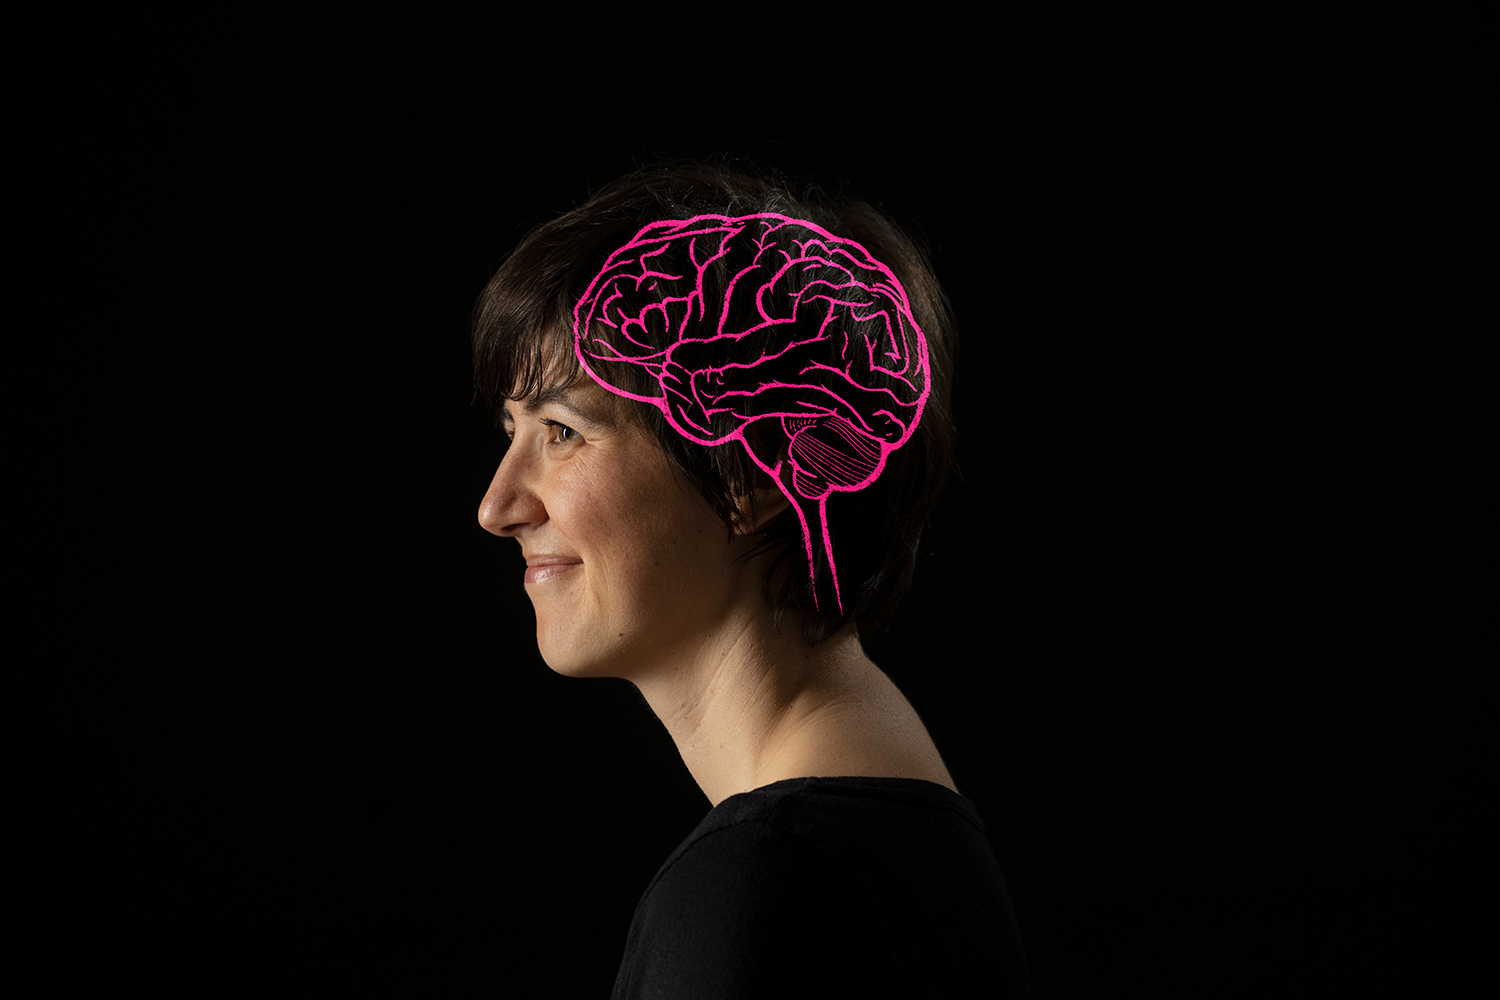 Keely Muscatell with an illustration of a brain